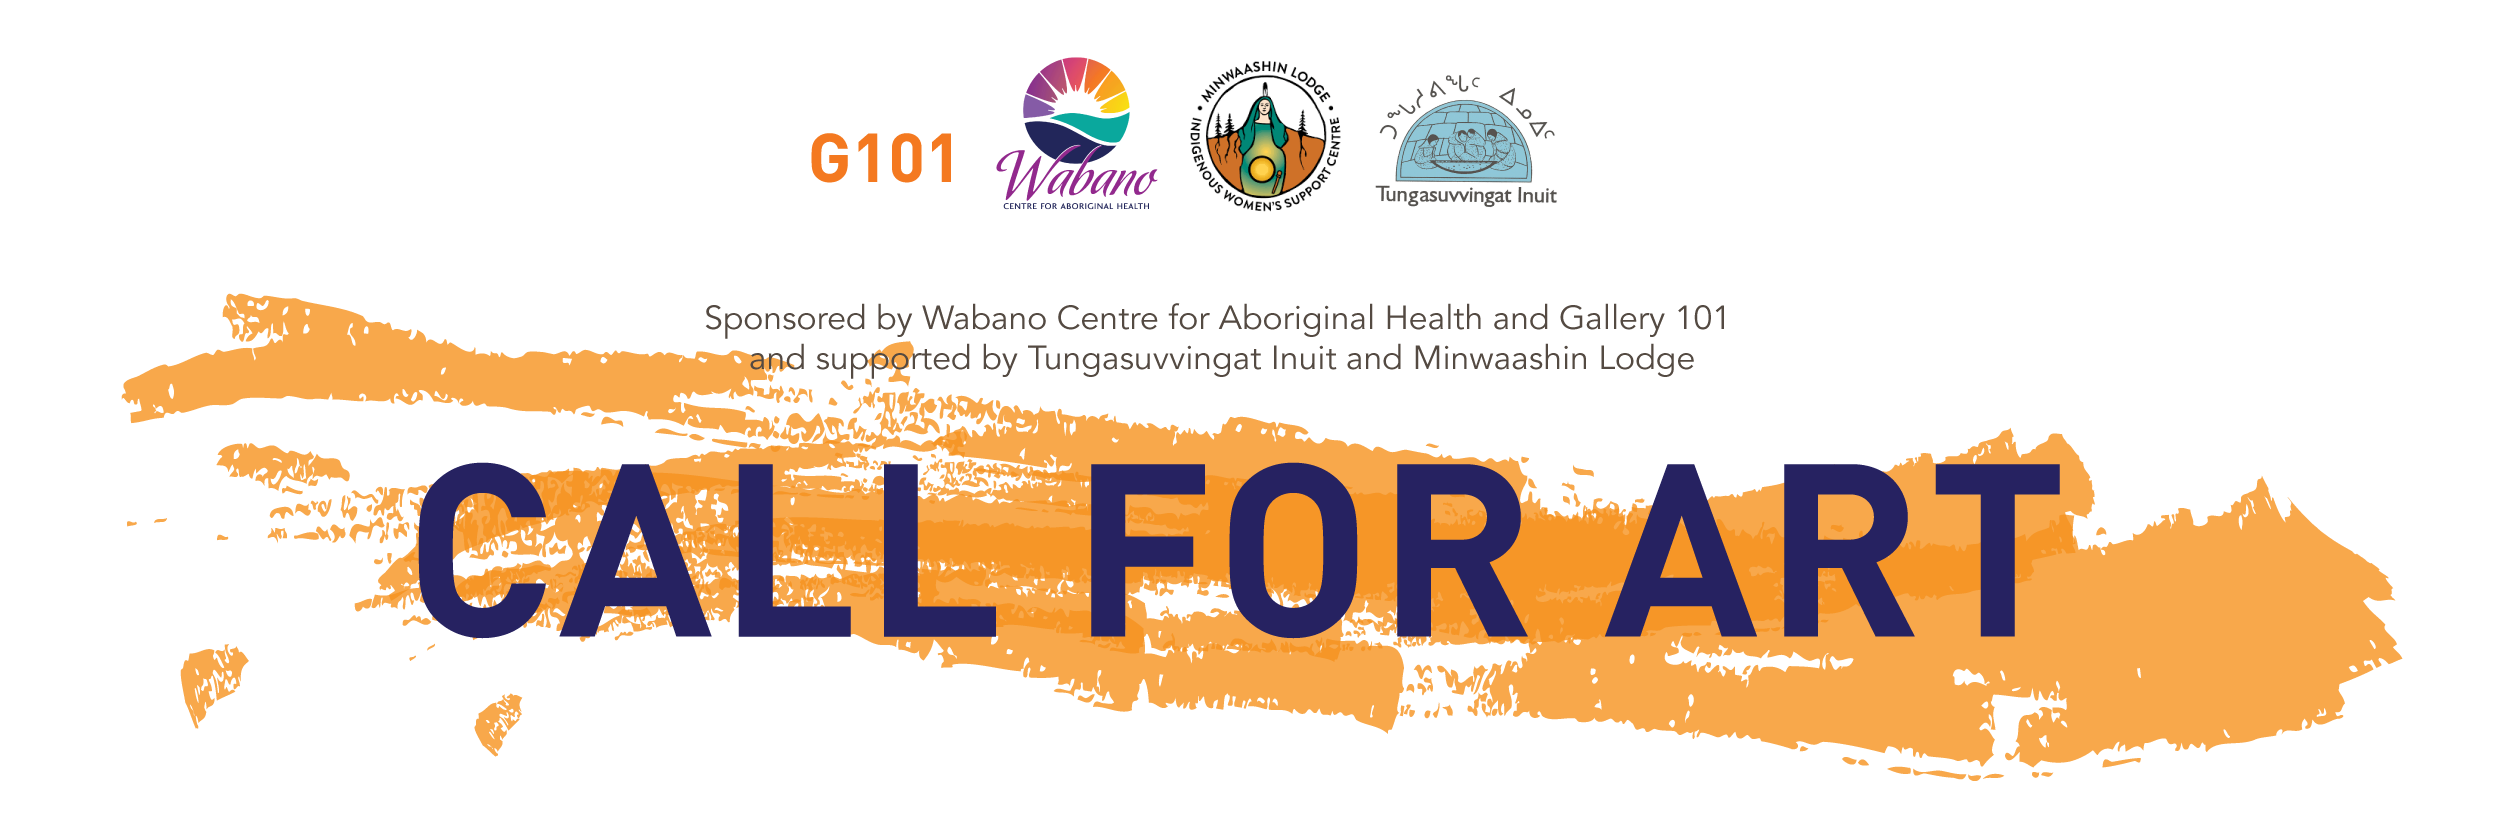 Call for Art Banner with logos from Gallery 101, Wabano, Minwaashin, and Tungasuvvingat